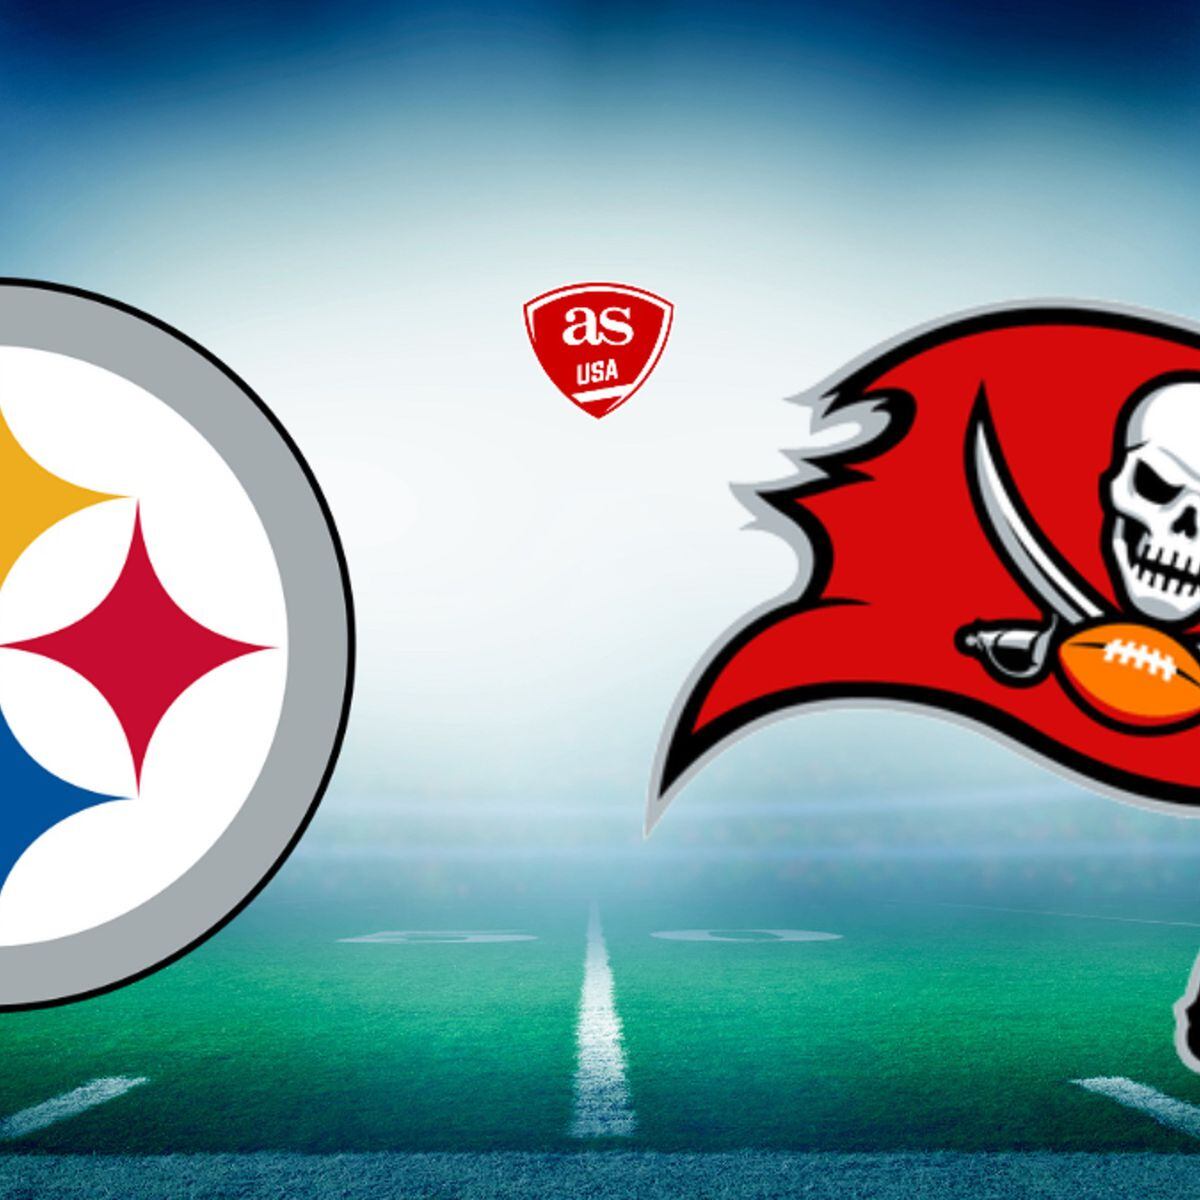 Steelers vs. Colts free live streams: How to watch NFL 'Monday